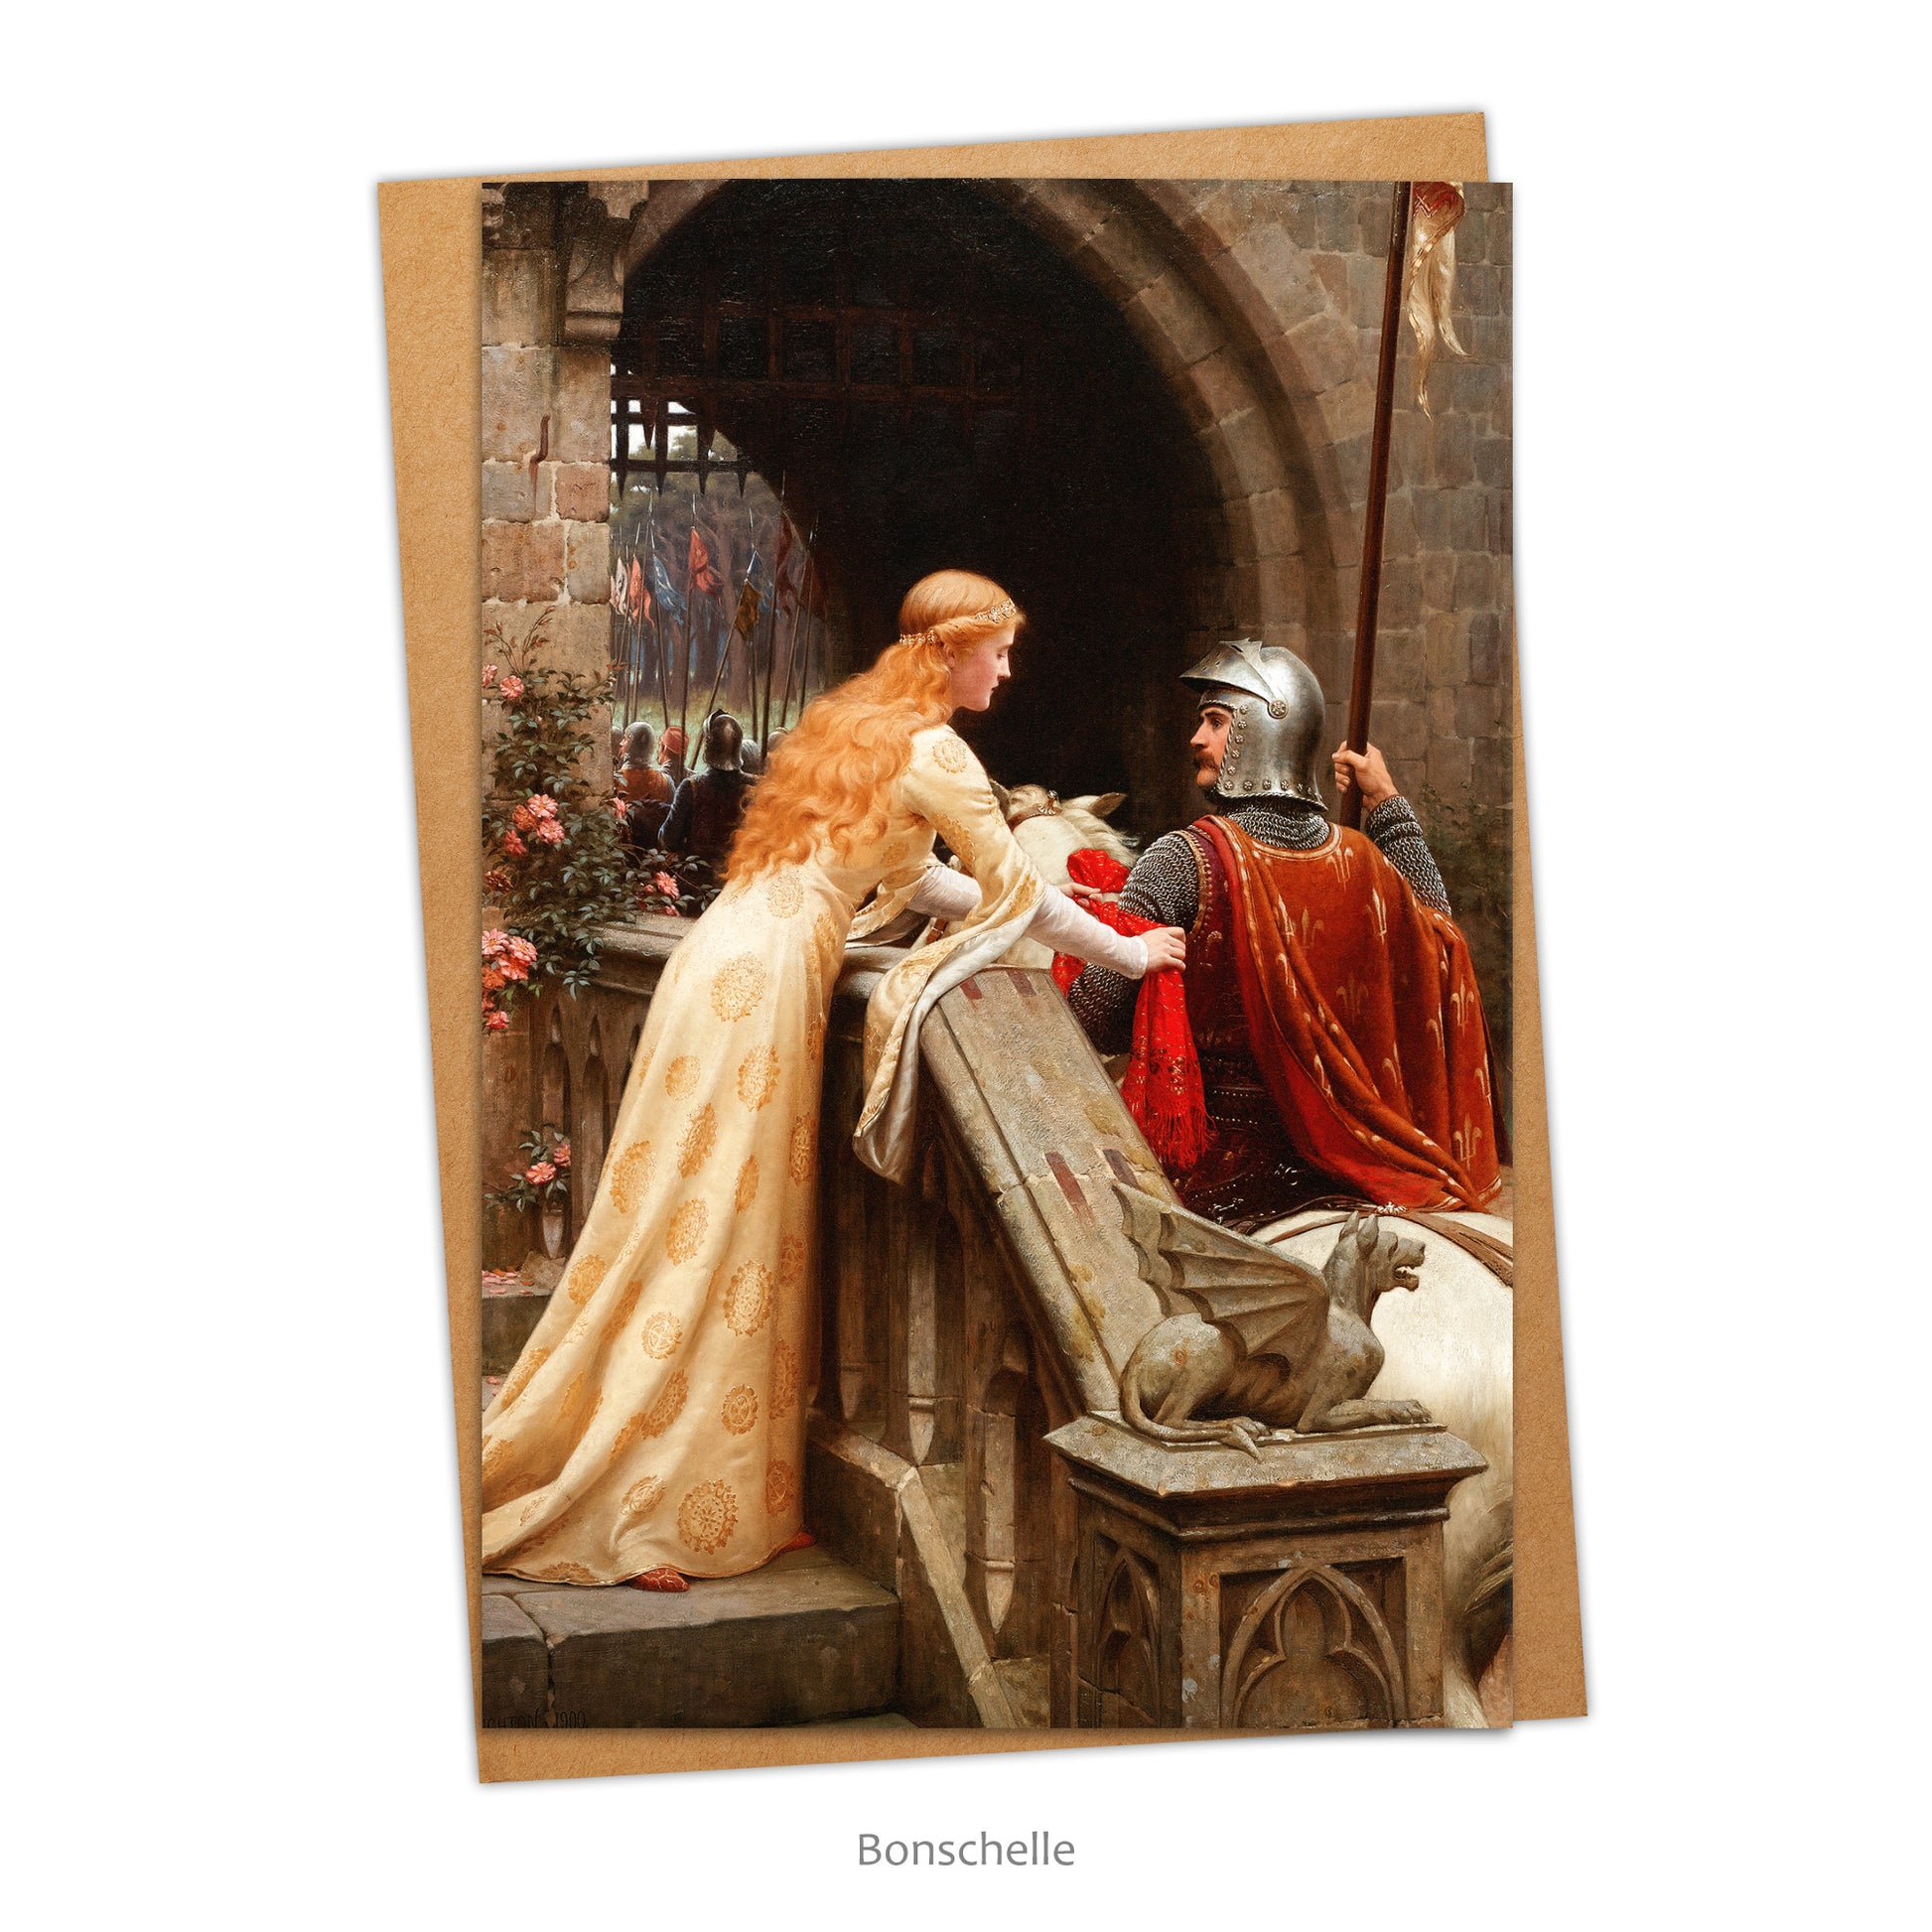 Card and envelope with image Pre-Raphaelite chivalry painting, 'God Speed' by Edmund Leighton (1852–1922) 